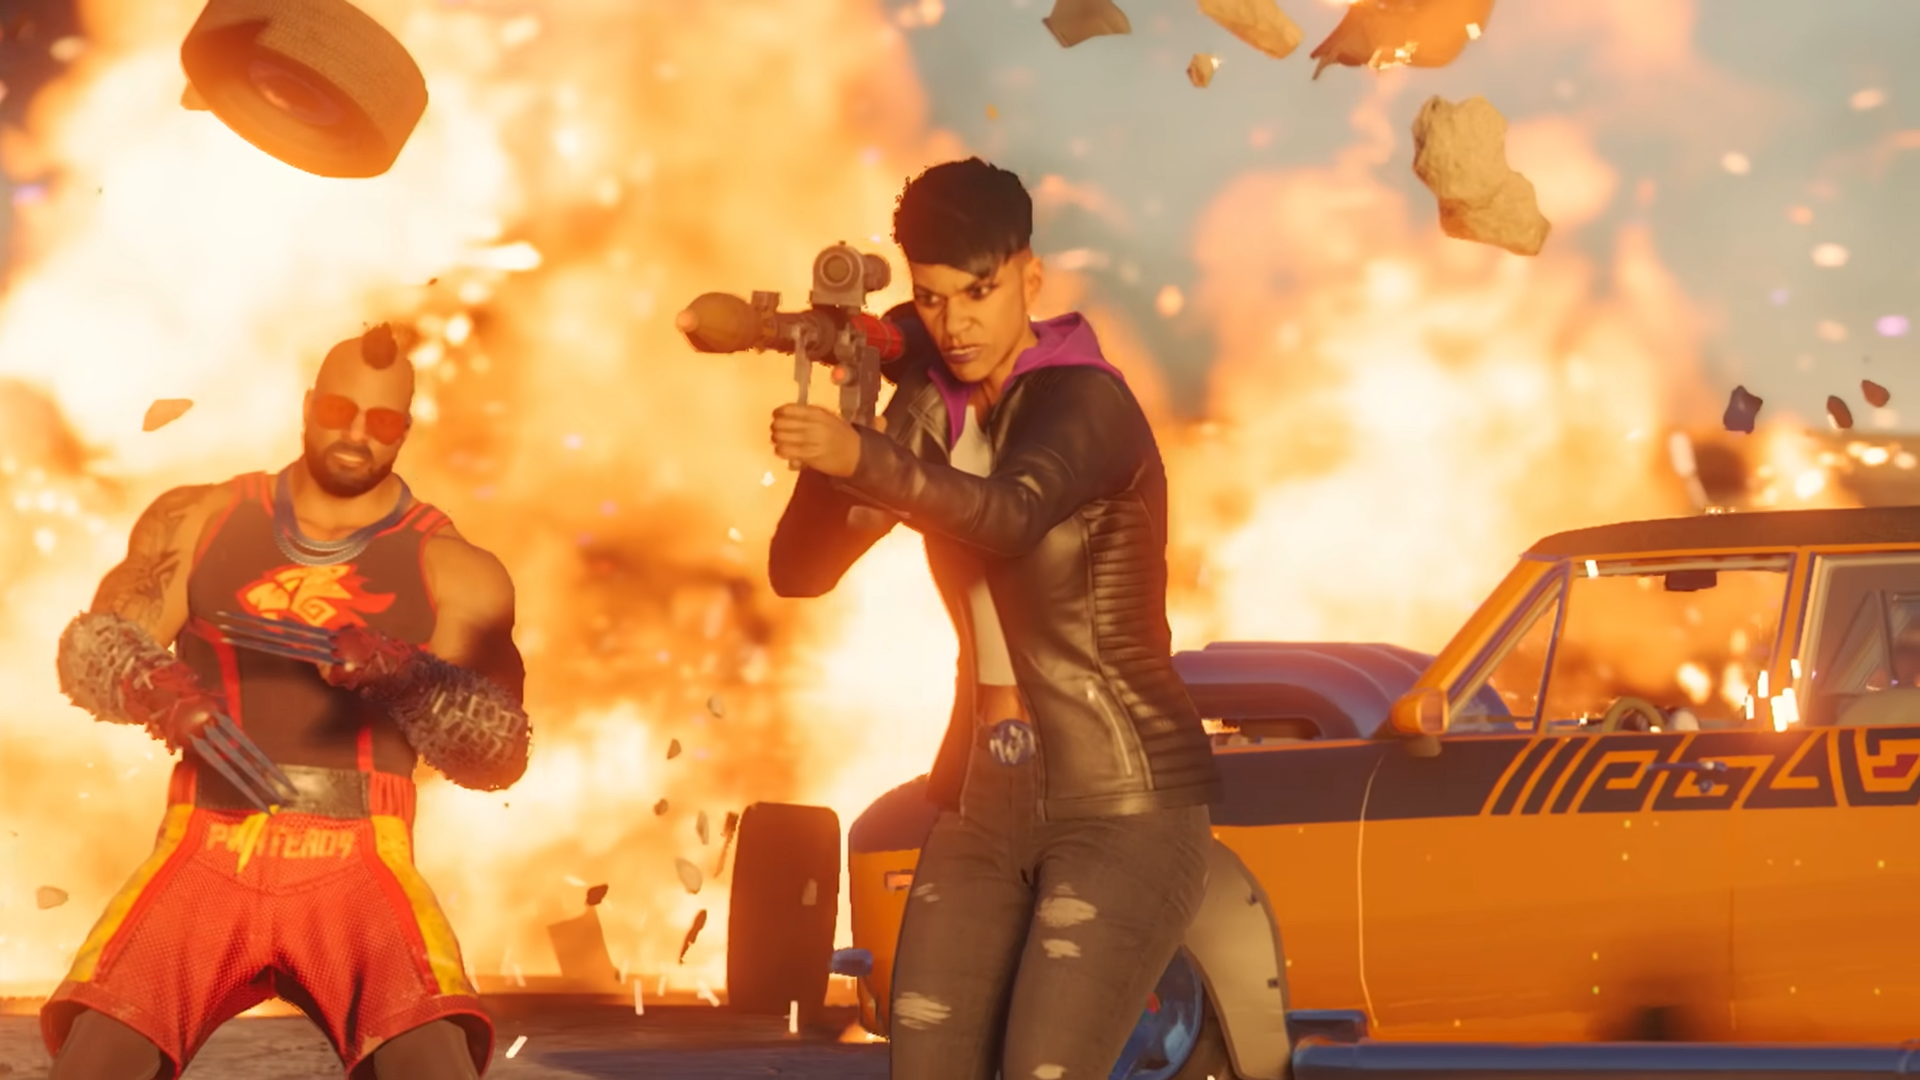 A Boss from Saints Row aims a rocket launcher off-camera, while in the background a car explodes into flames and another gang member reacts.